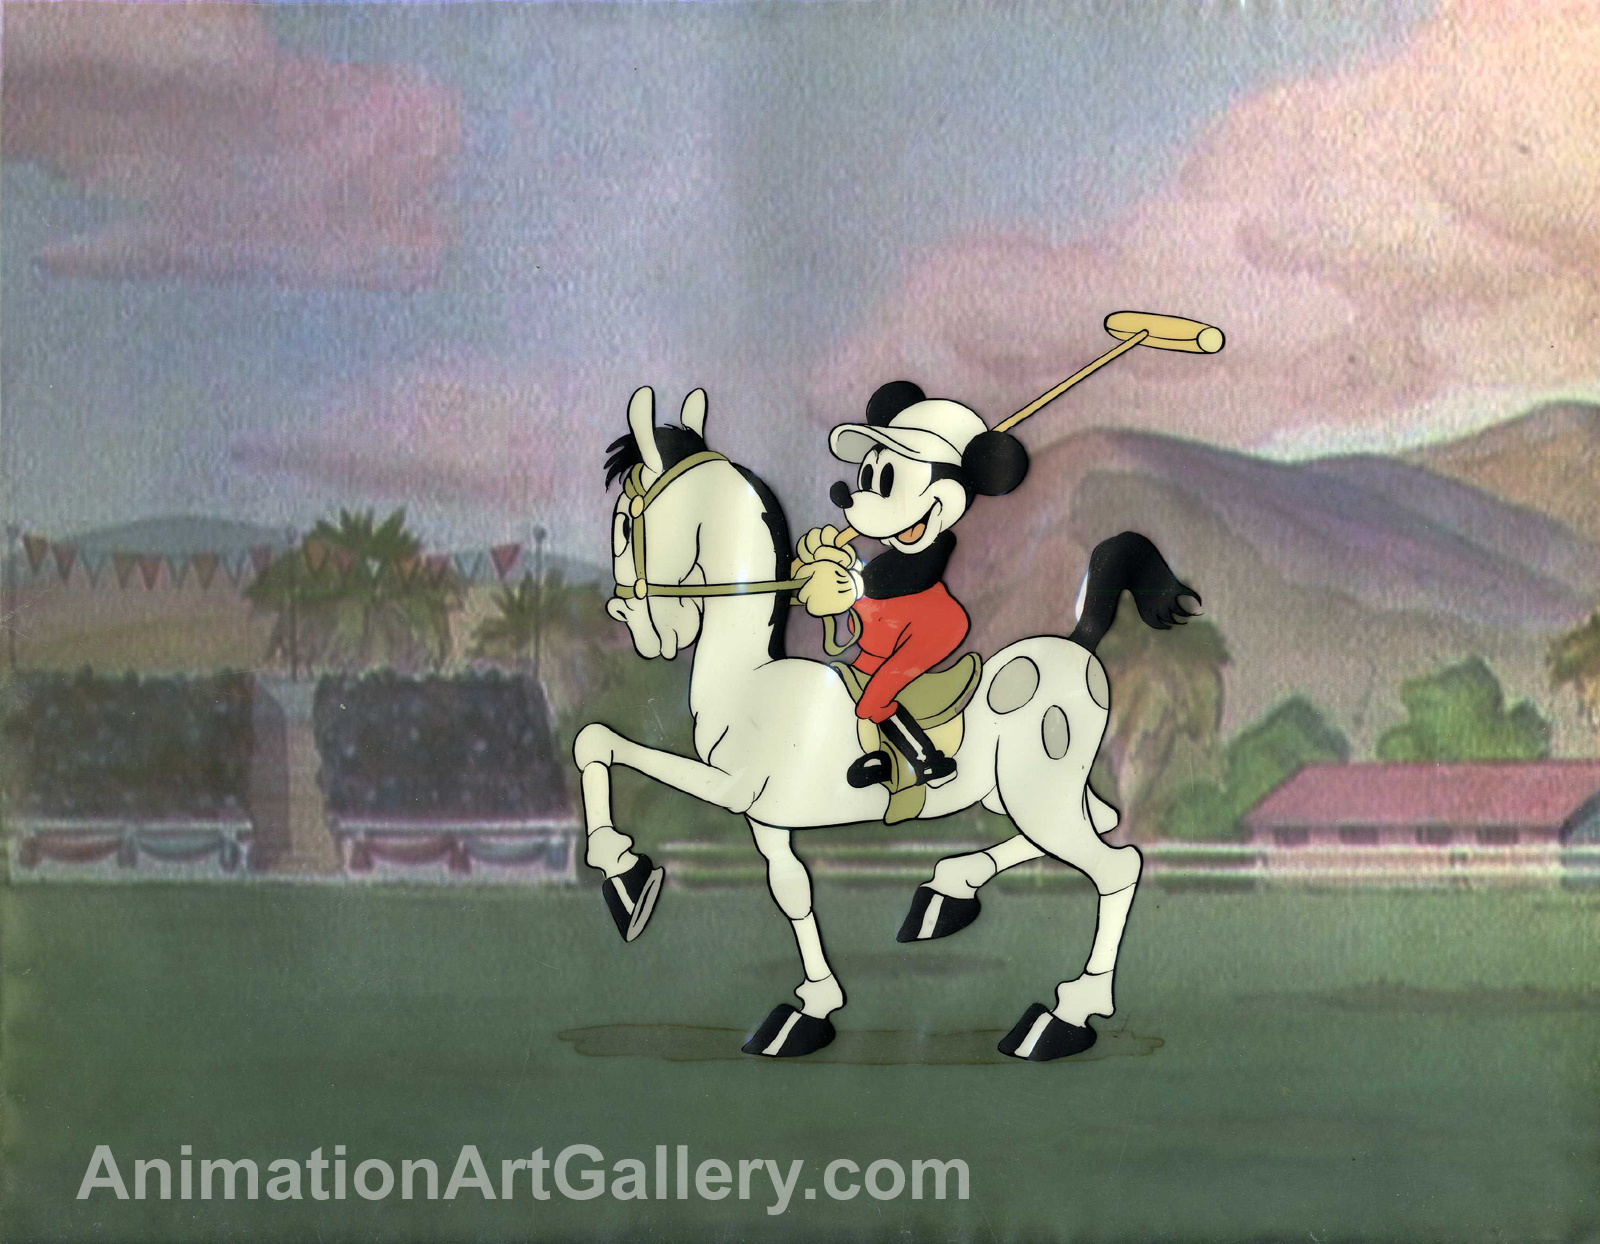 Original Production Cel of Mickey Mouse from Mickey's Polo Team